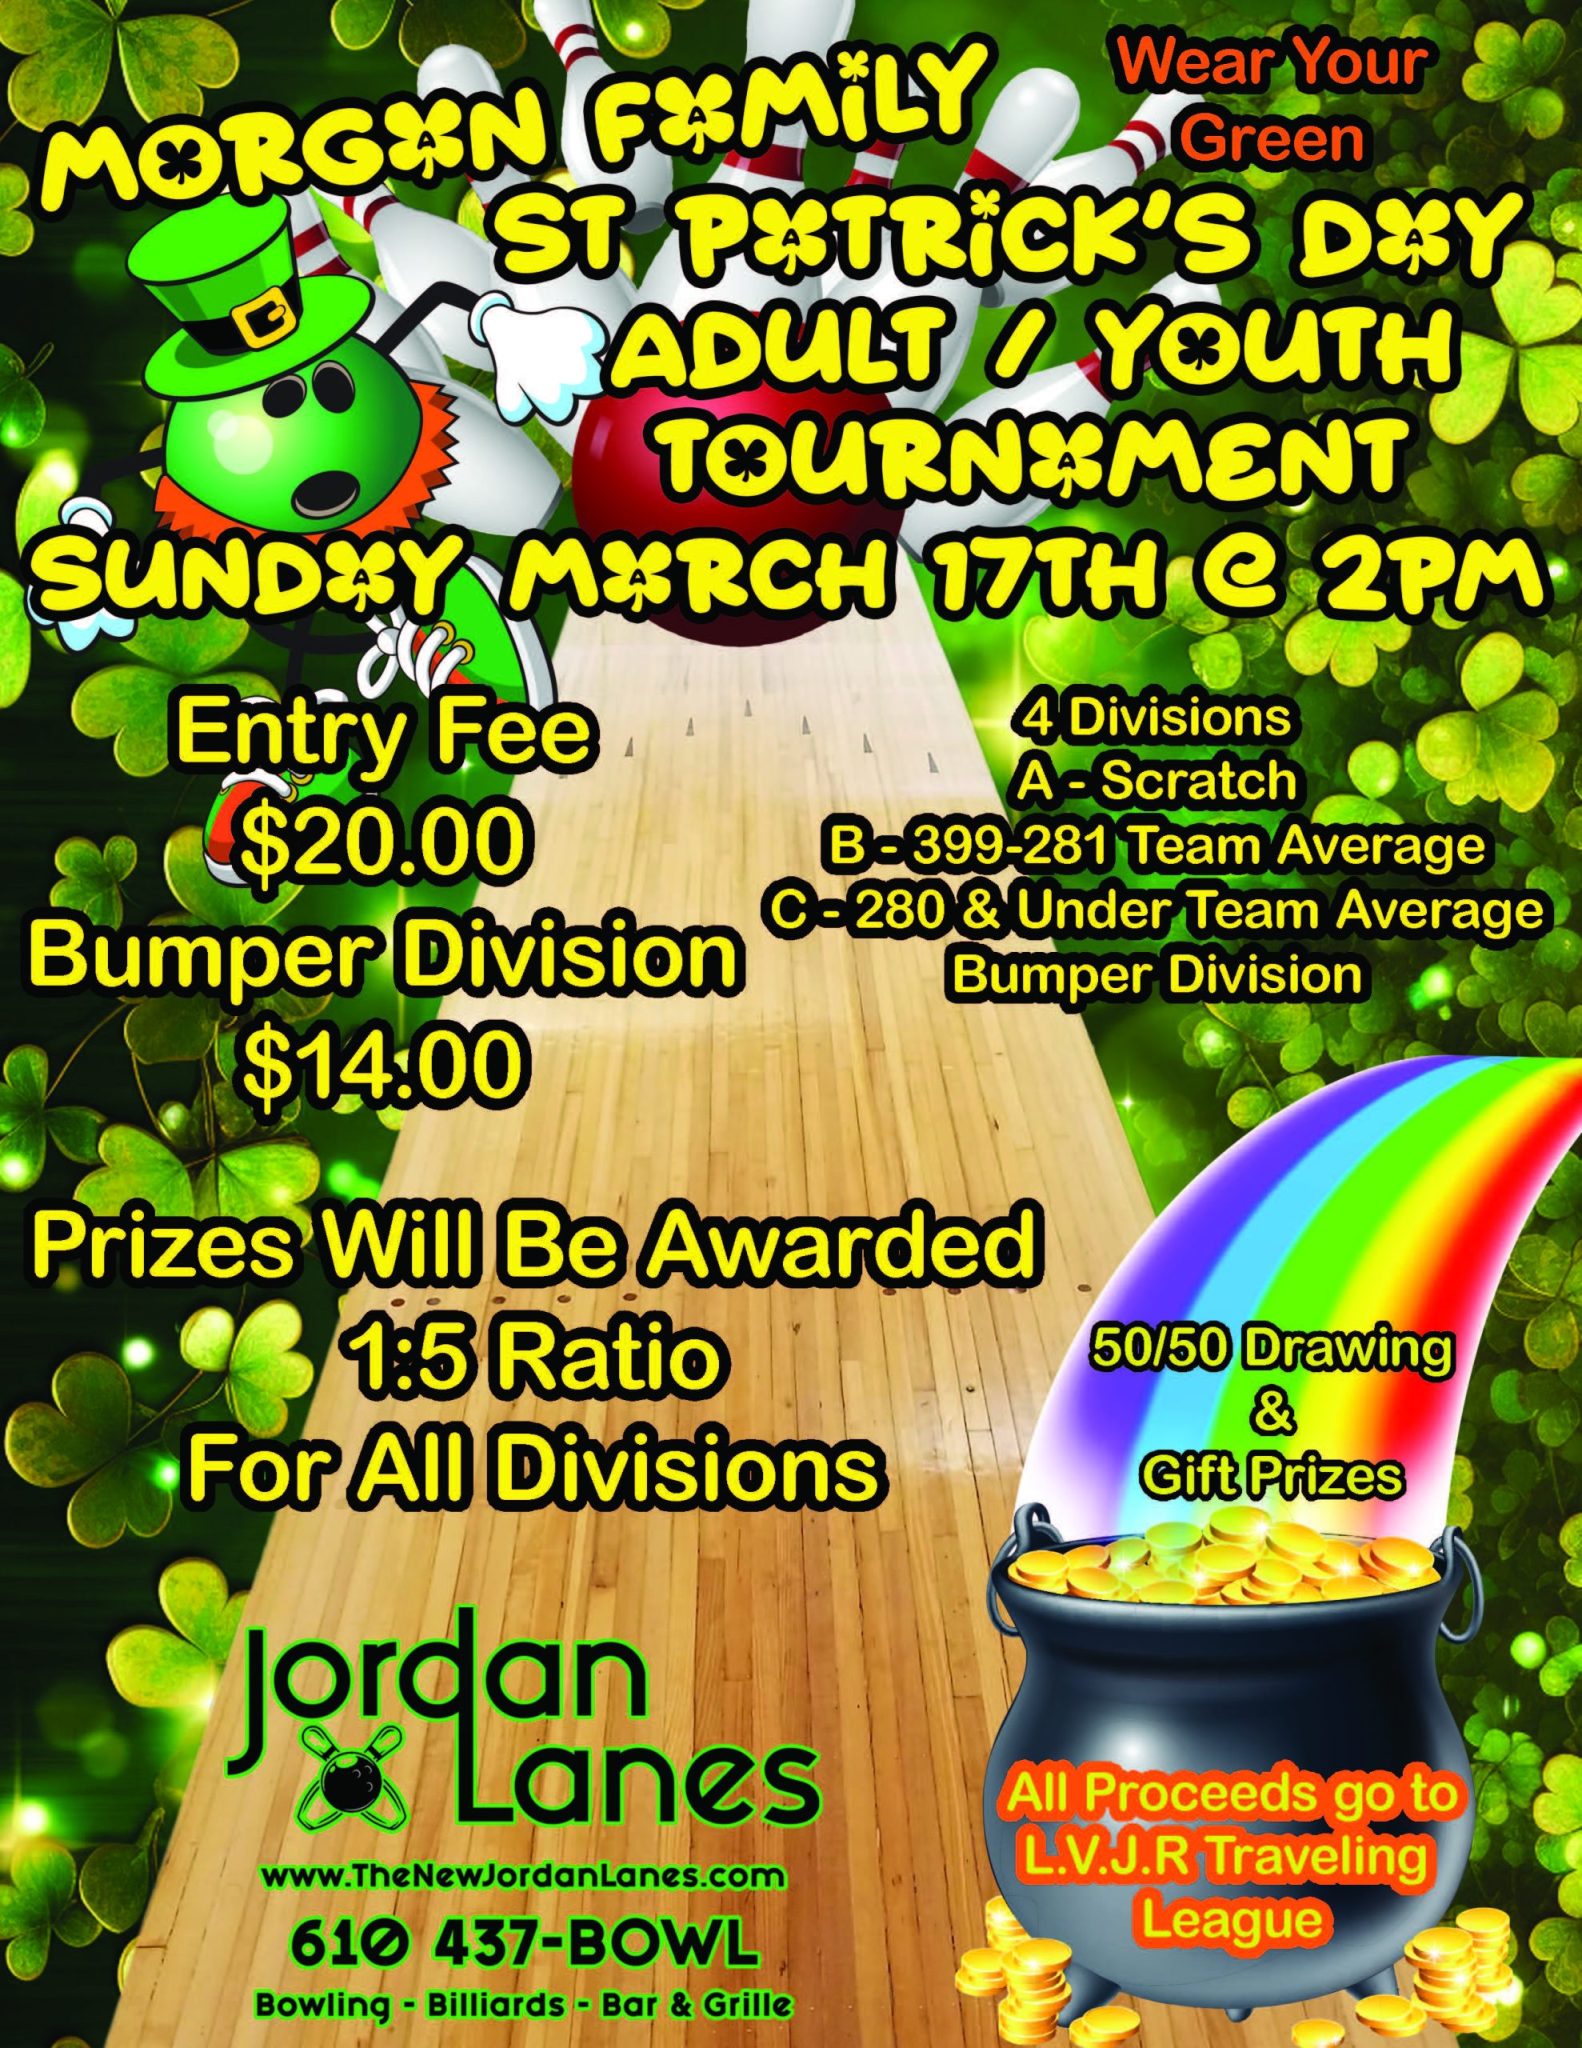 Morgan Family Adult / Youth Tournament 14